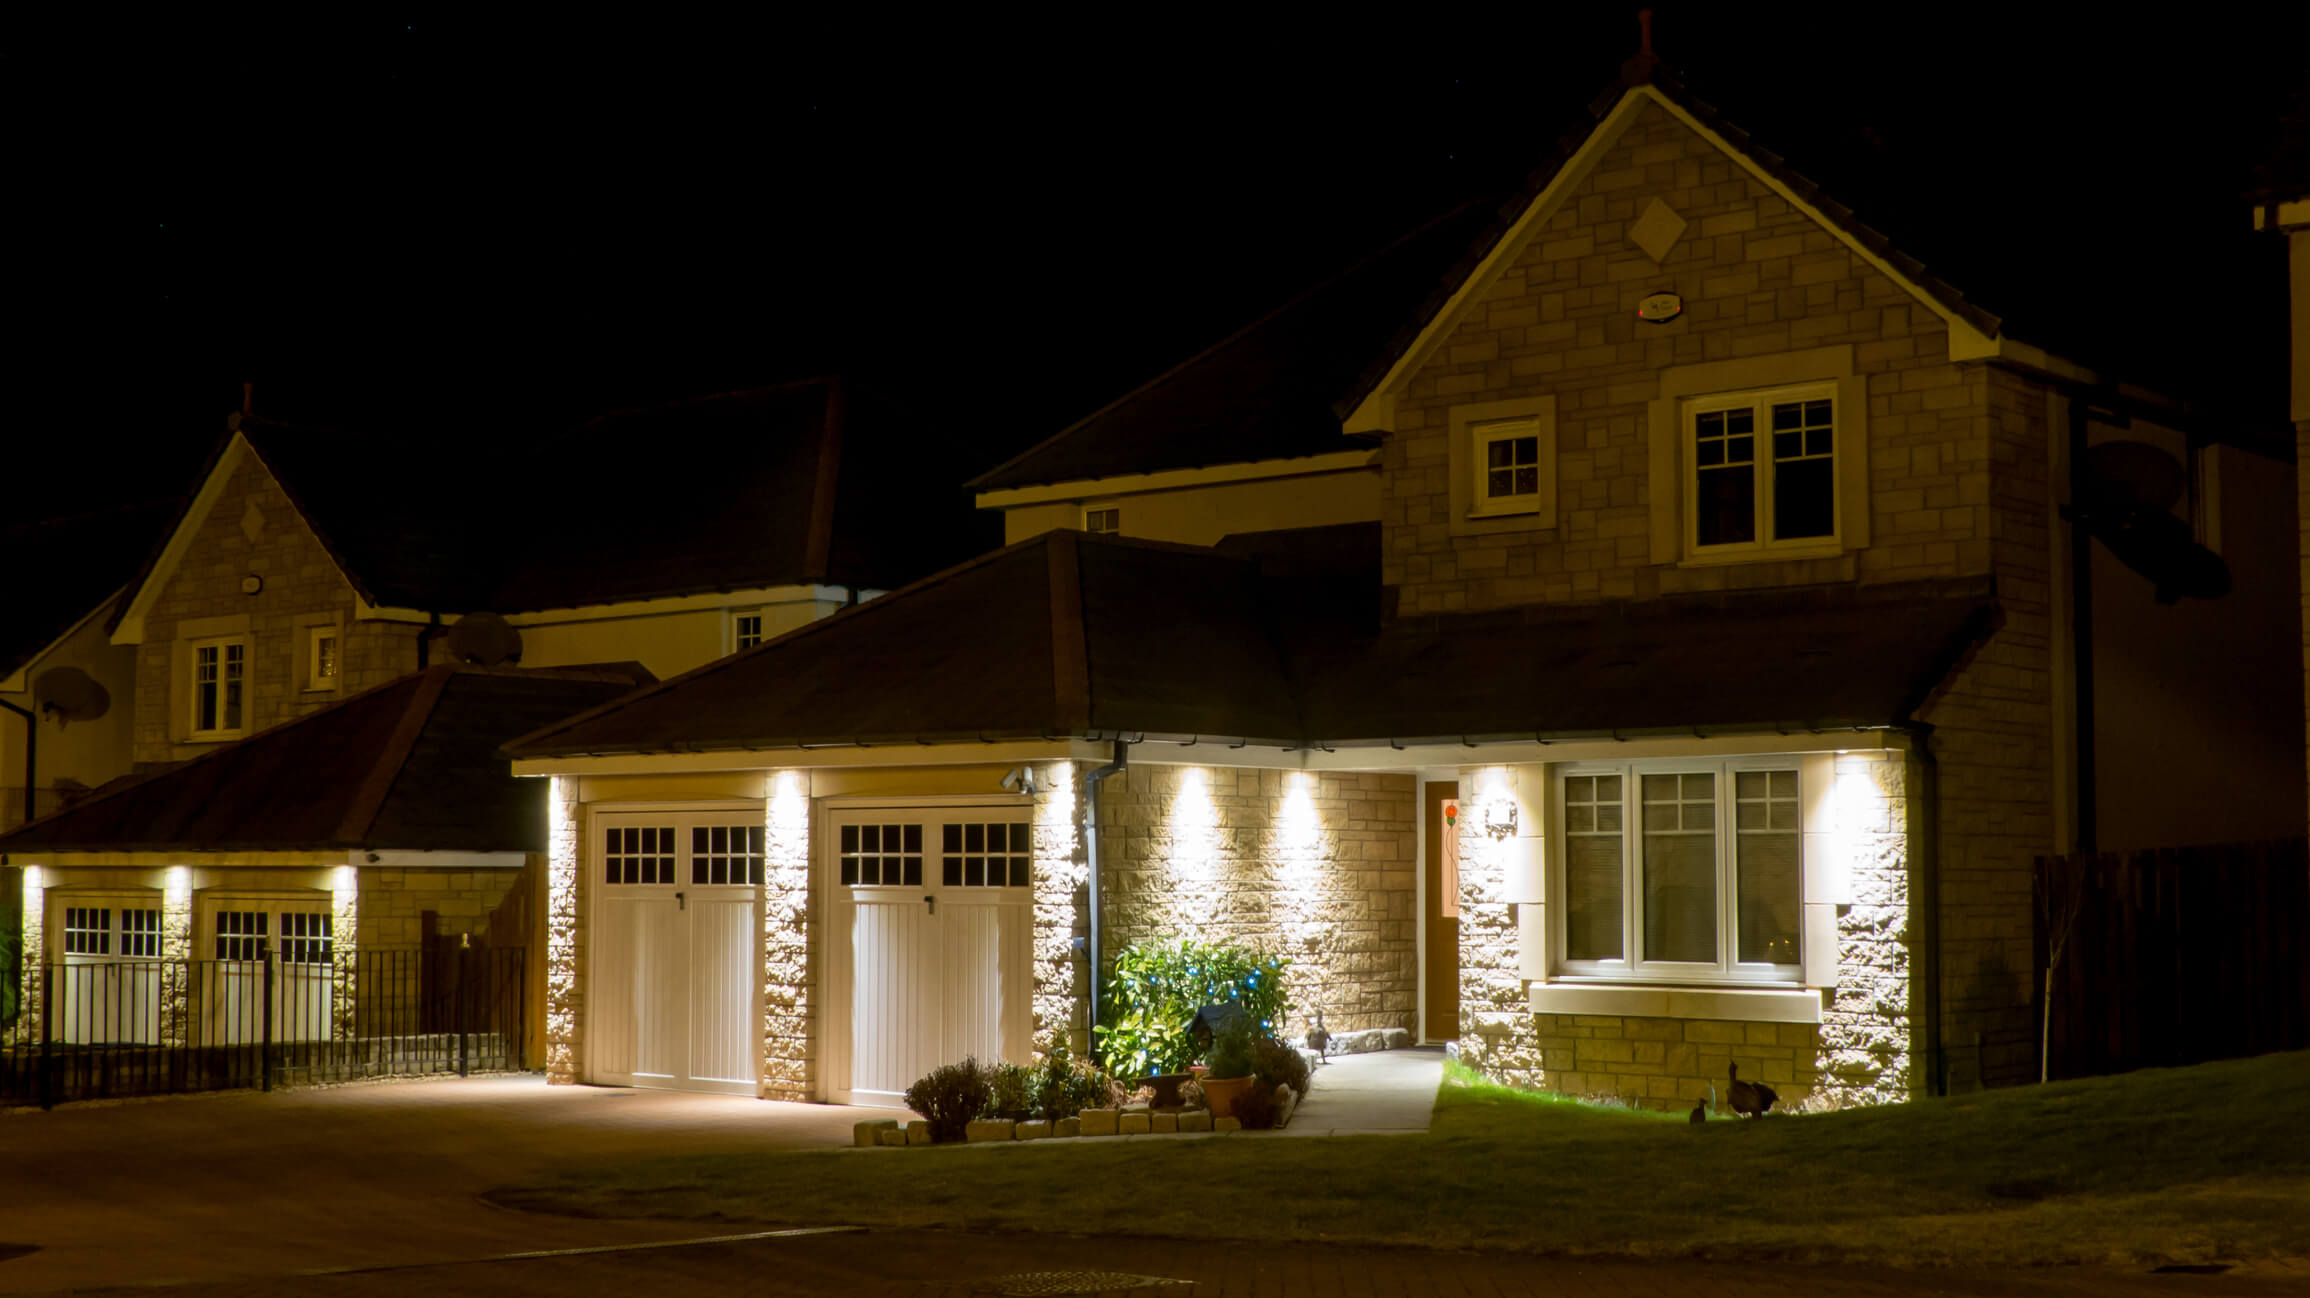 Outdoor lighting can increase the curb appeal of your home